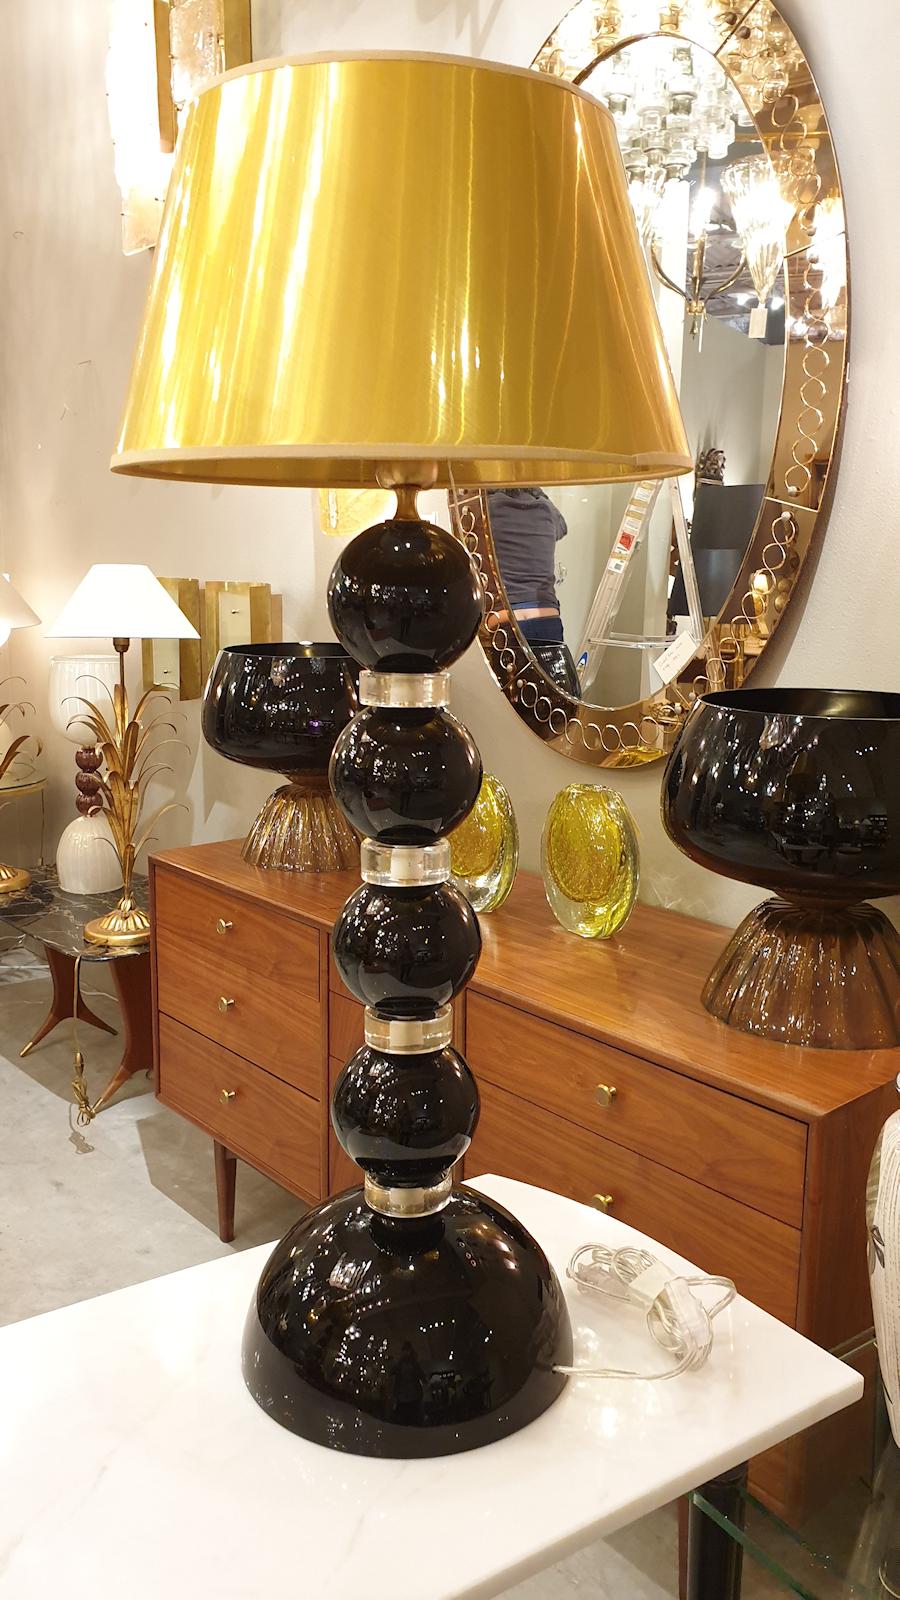 Pair of large opaque black and translucent gold Murano glass, Mid-Century Modern table lamps.
Murano, Italy, 1970s
Sold with new gold color shades.
1 light each, rewired for the US.
Classic with a modern touch. 